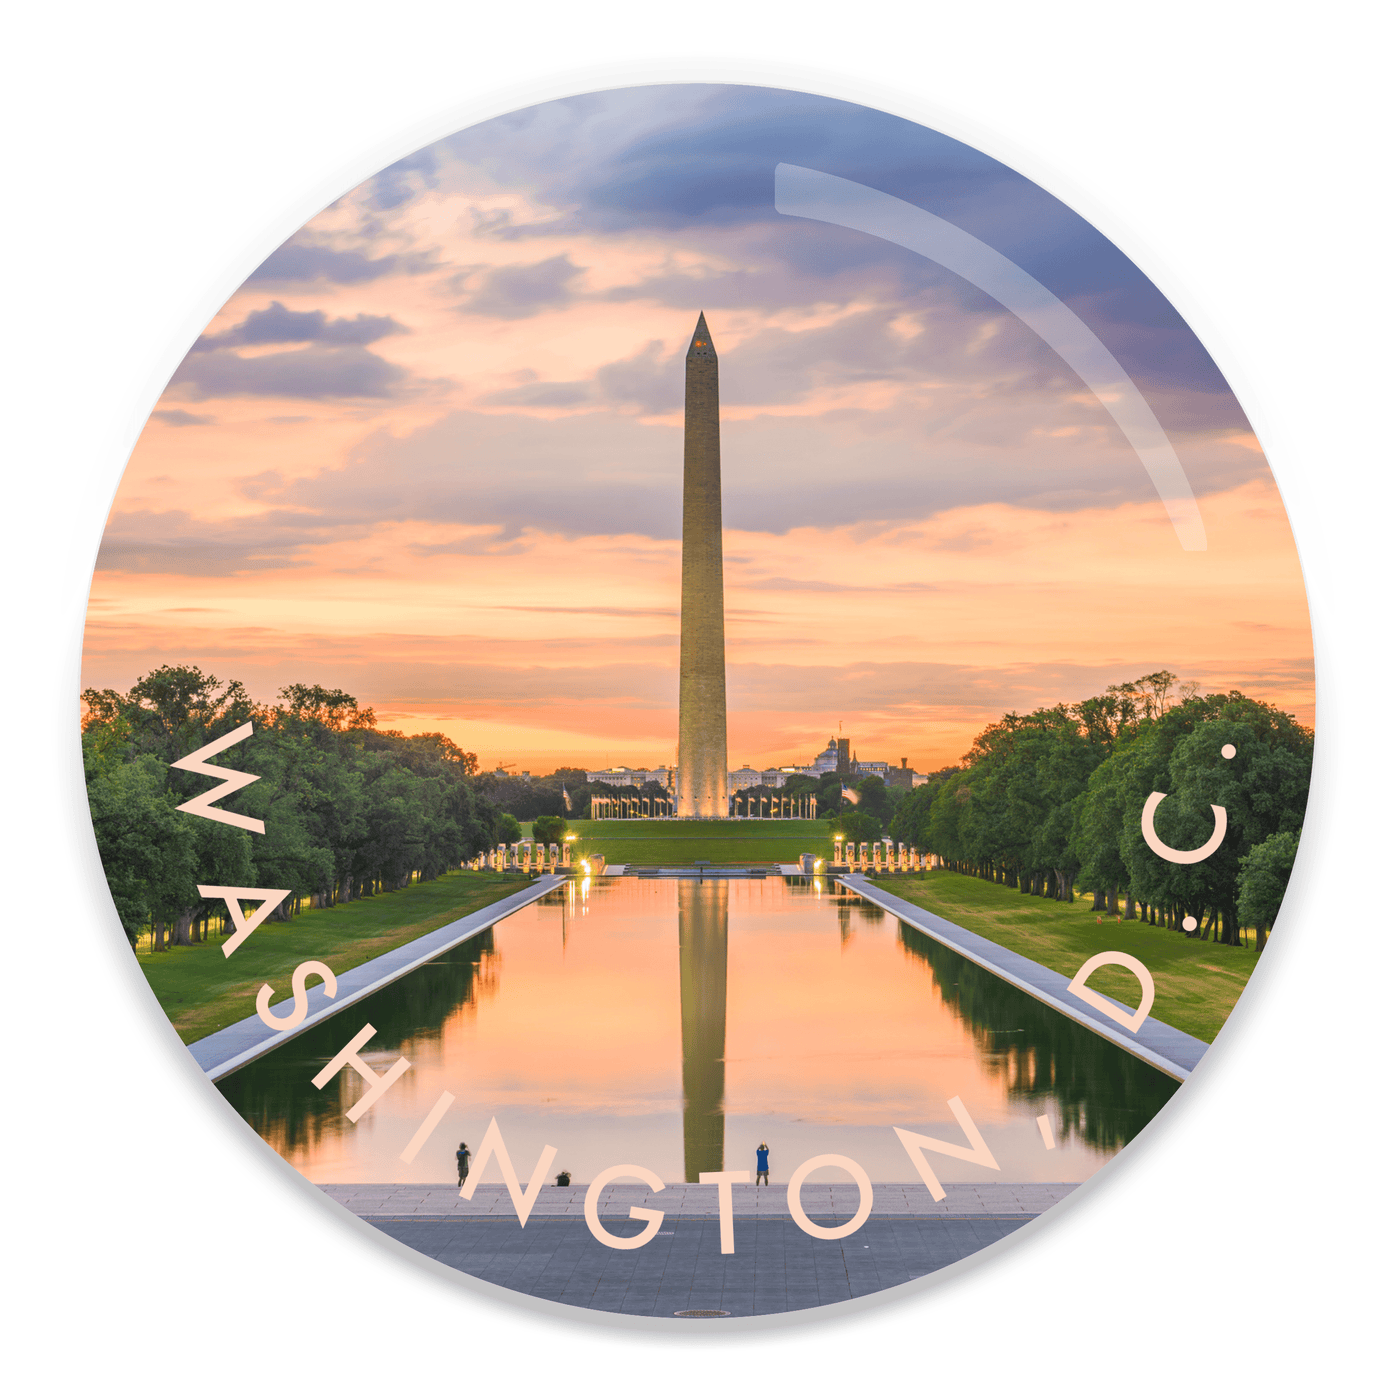 2.25 inch round colorful magnet with image of the Washington monument